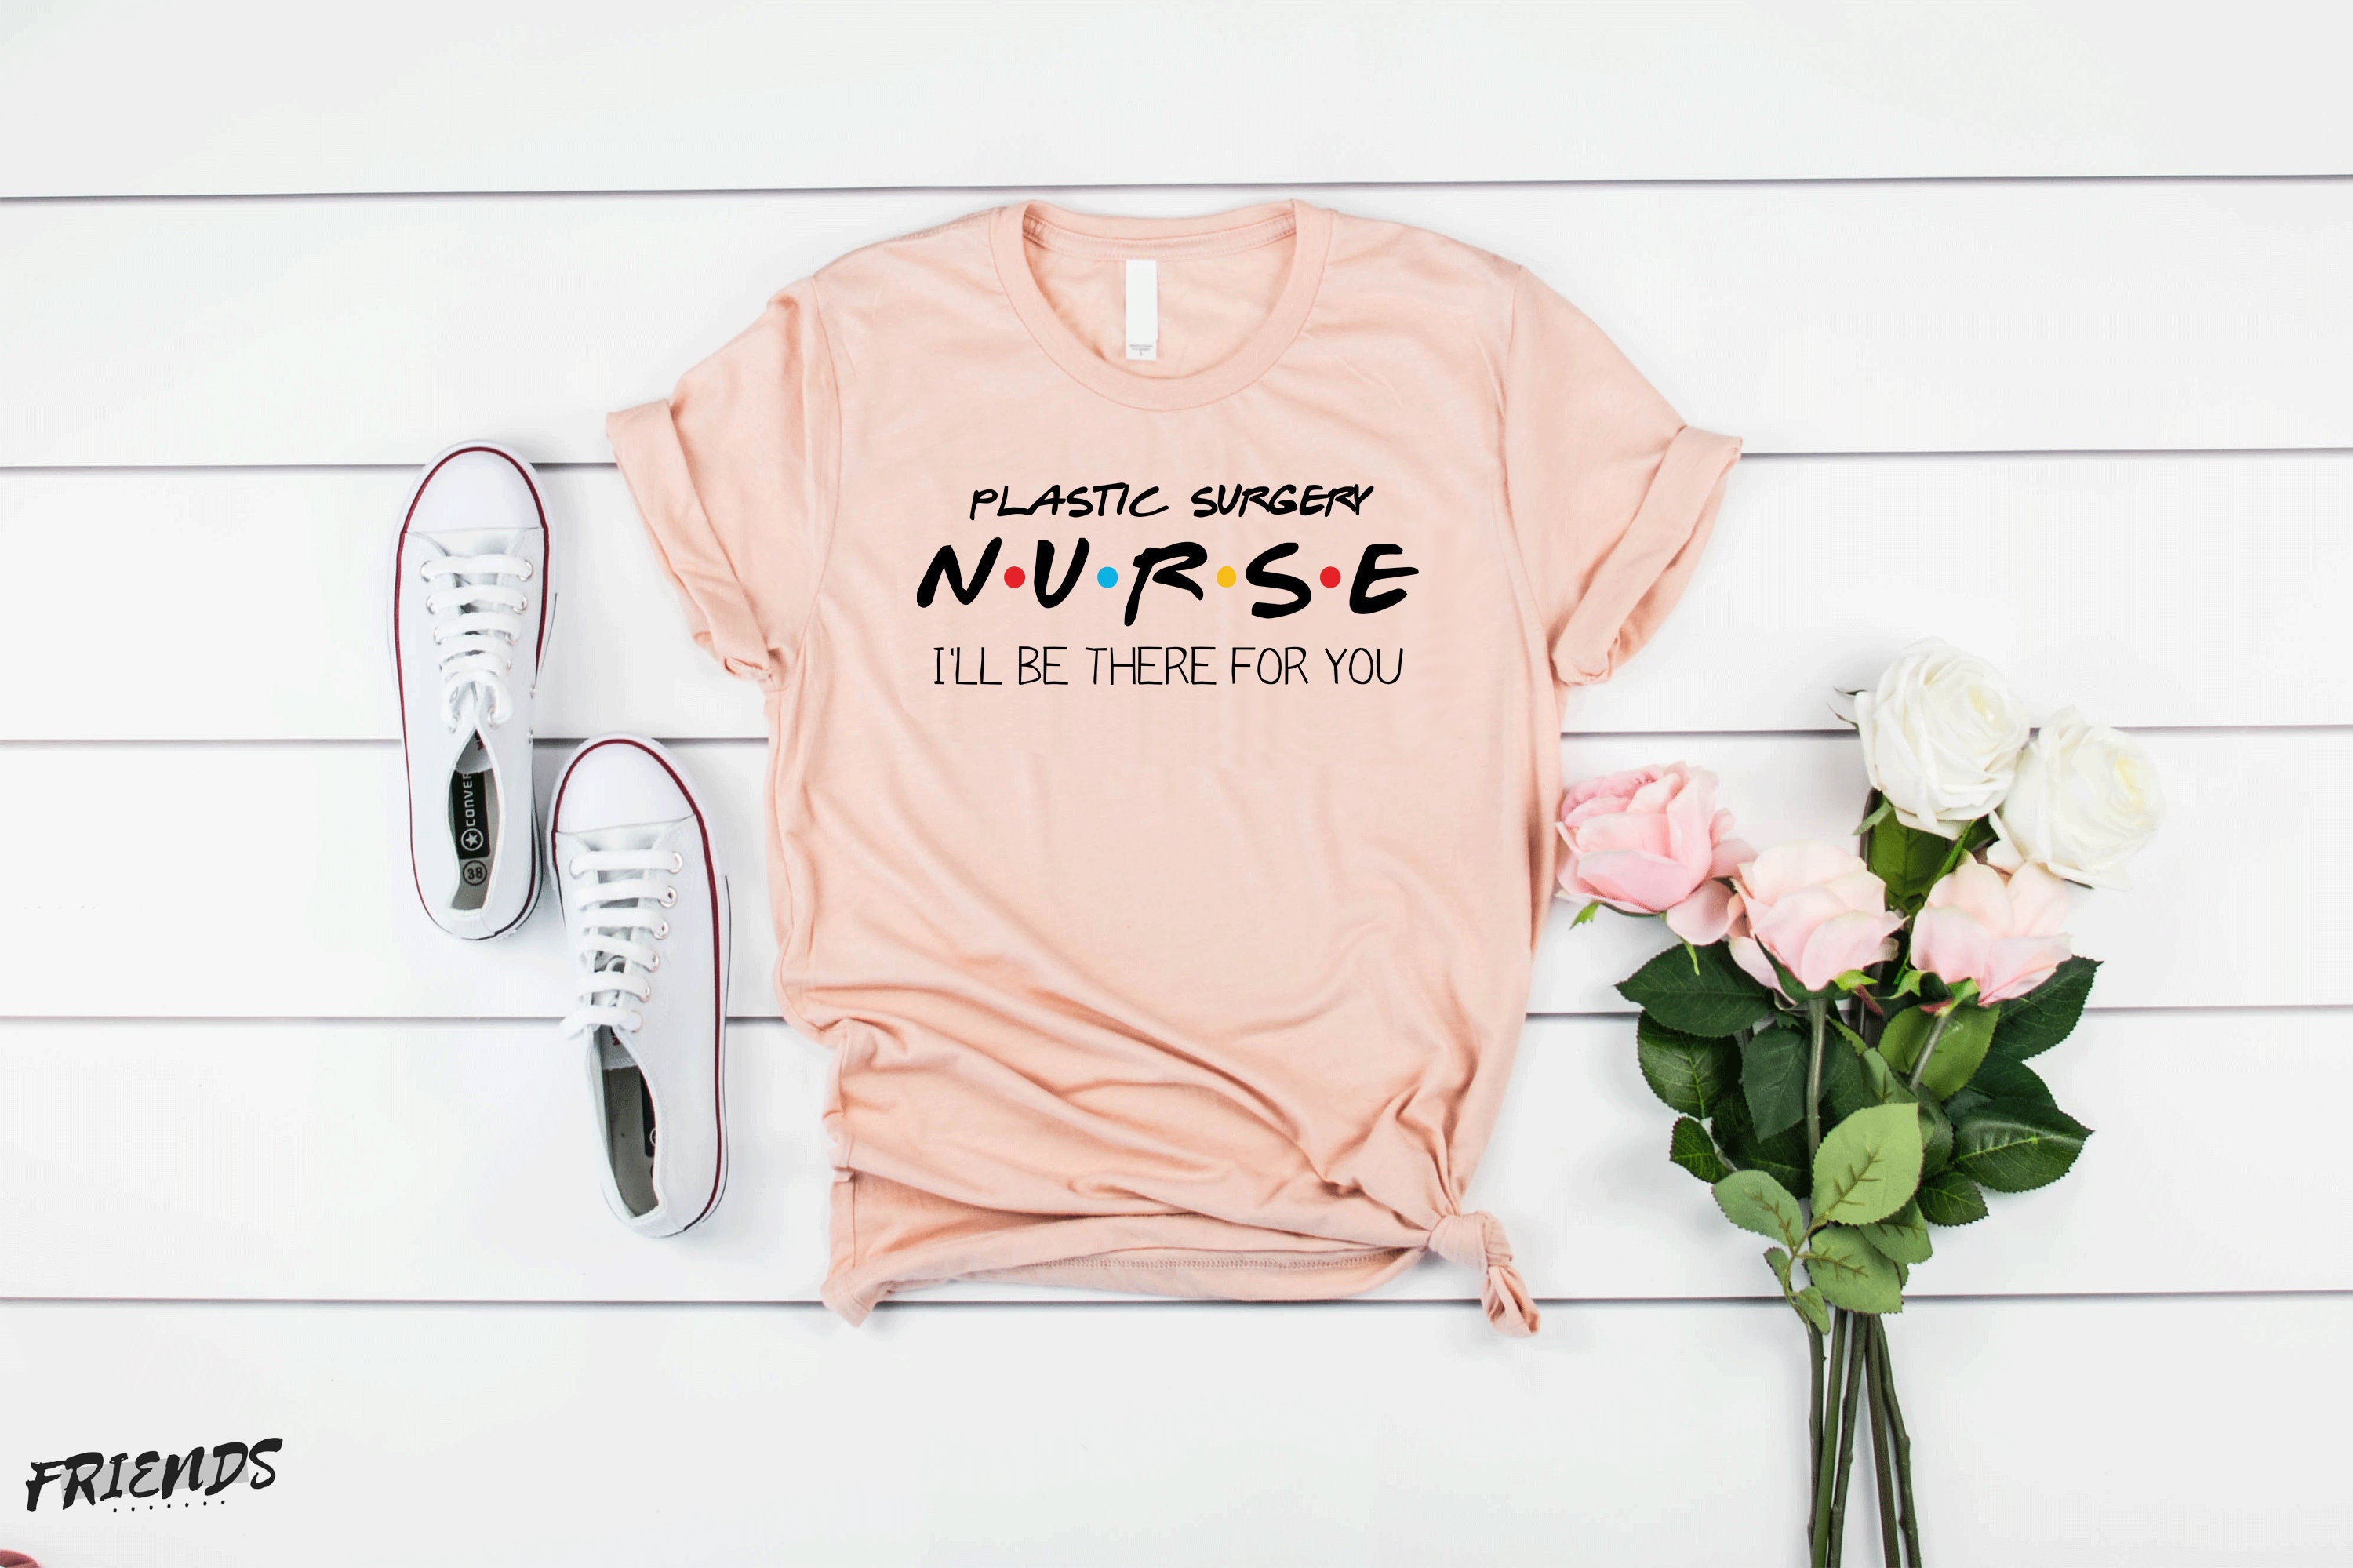 Plastic Surgery Nurse Ill Be There for You T-shirt Funny